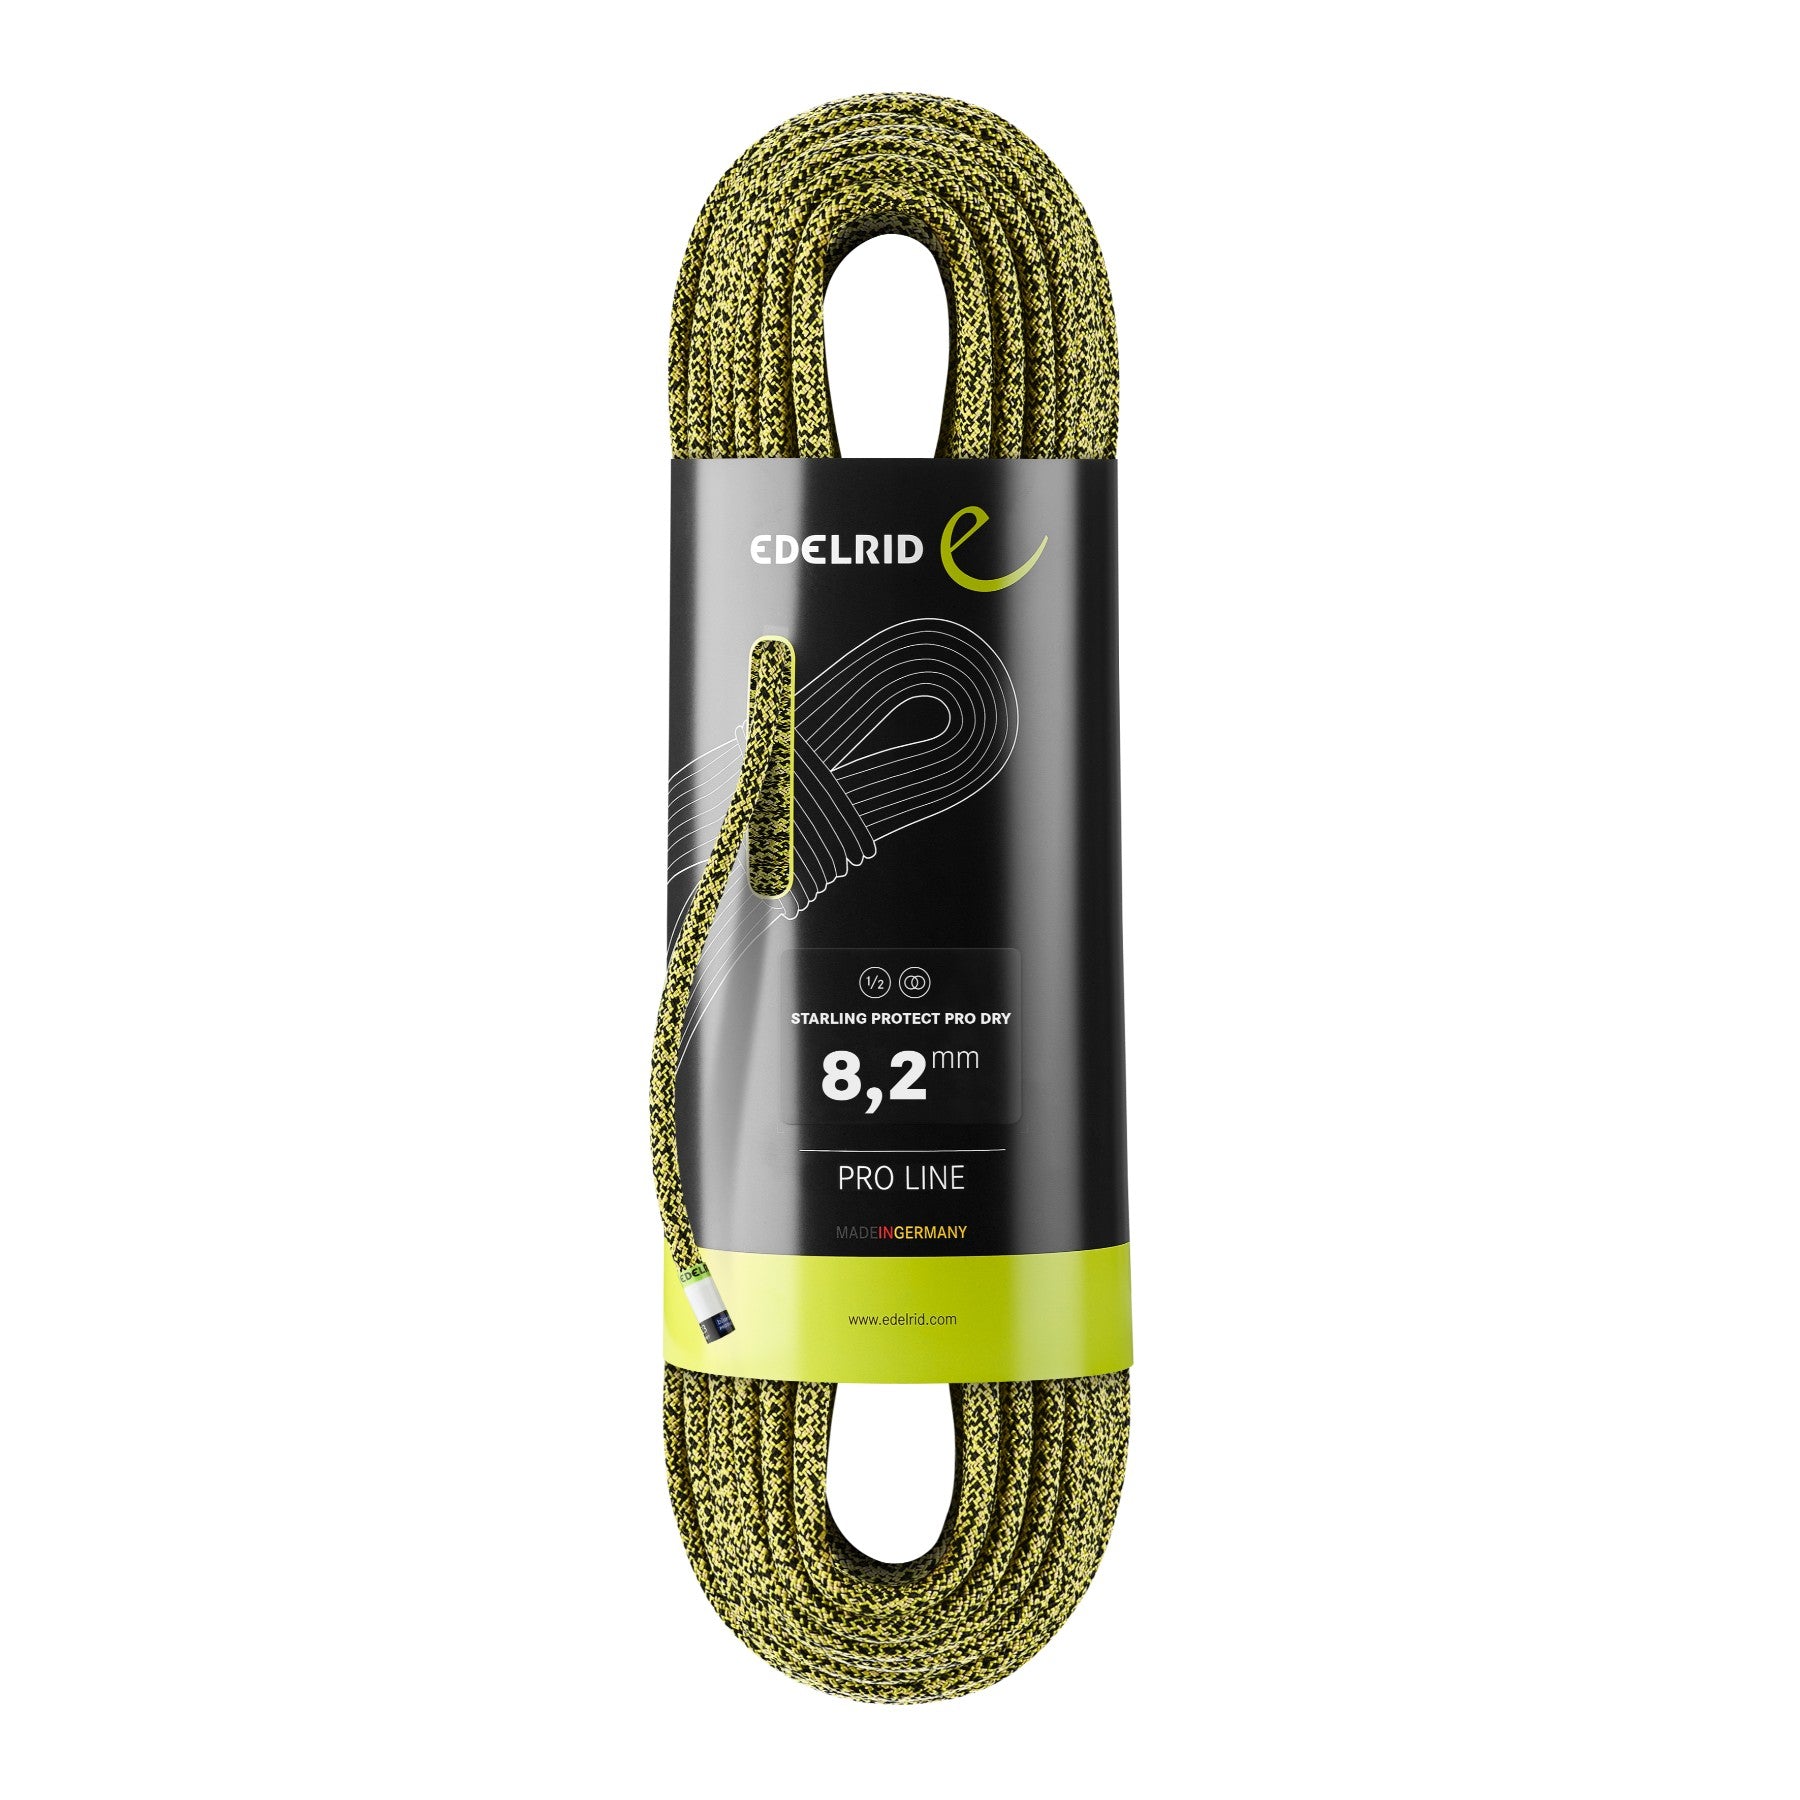 Edelrid Starling Protect Pro Dry 8.2mm x 50m, Colour Yellow-Night